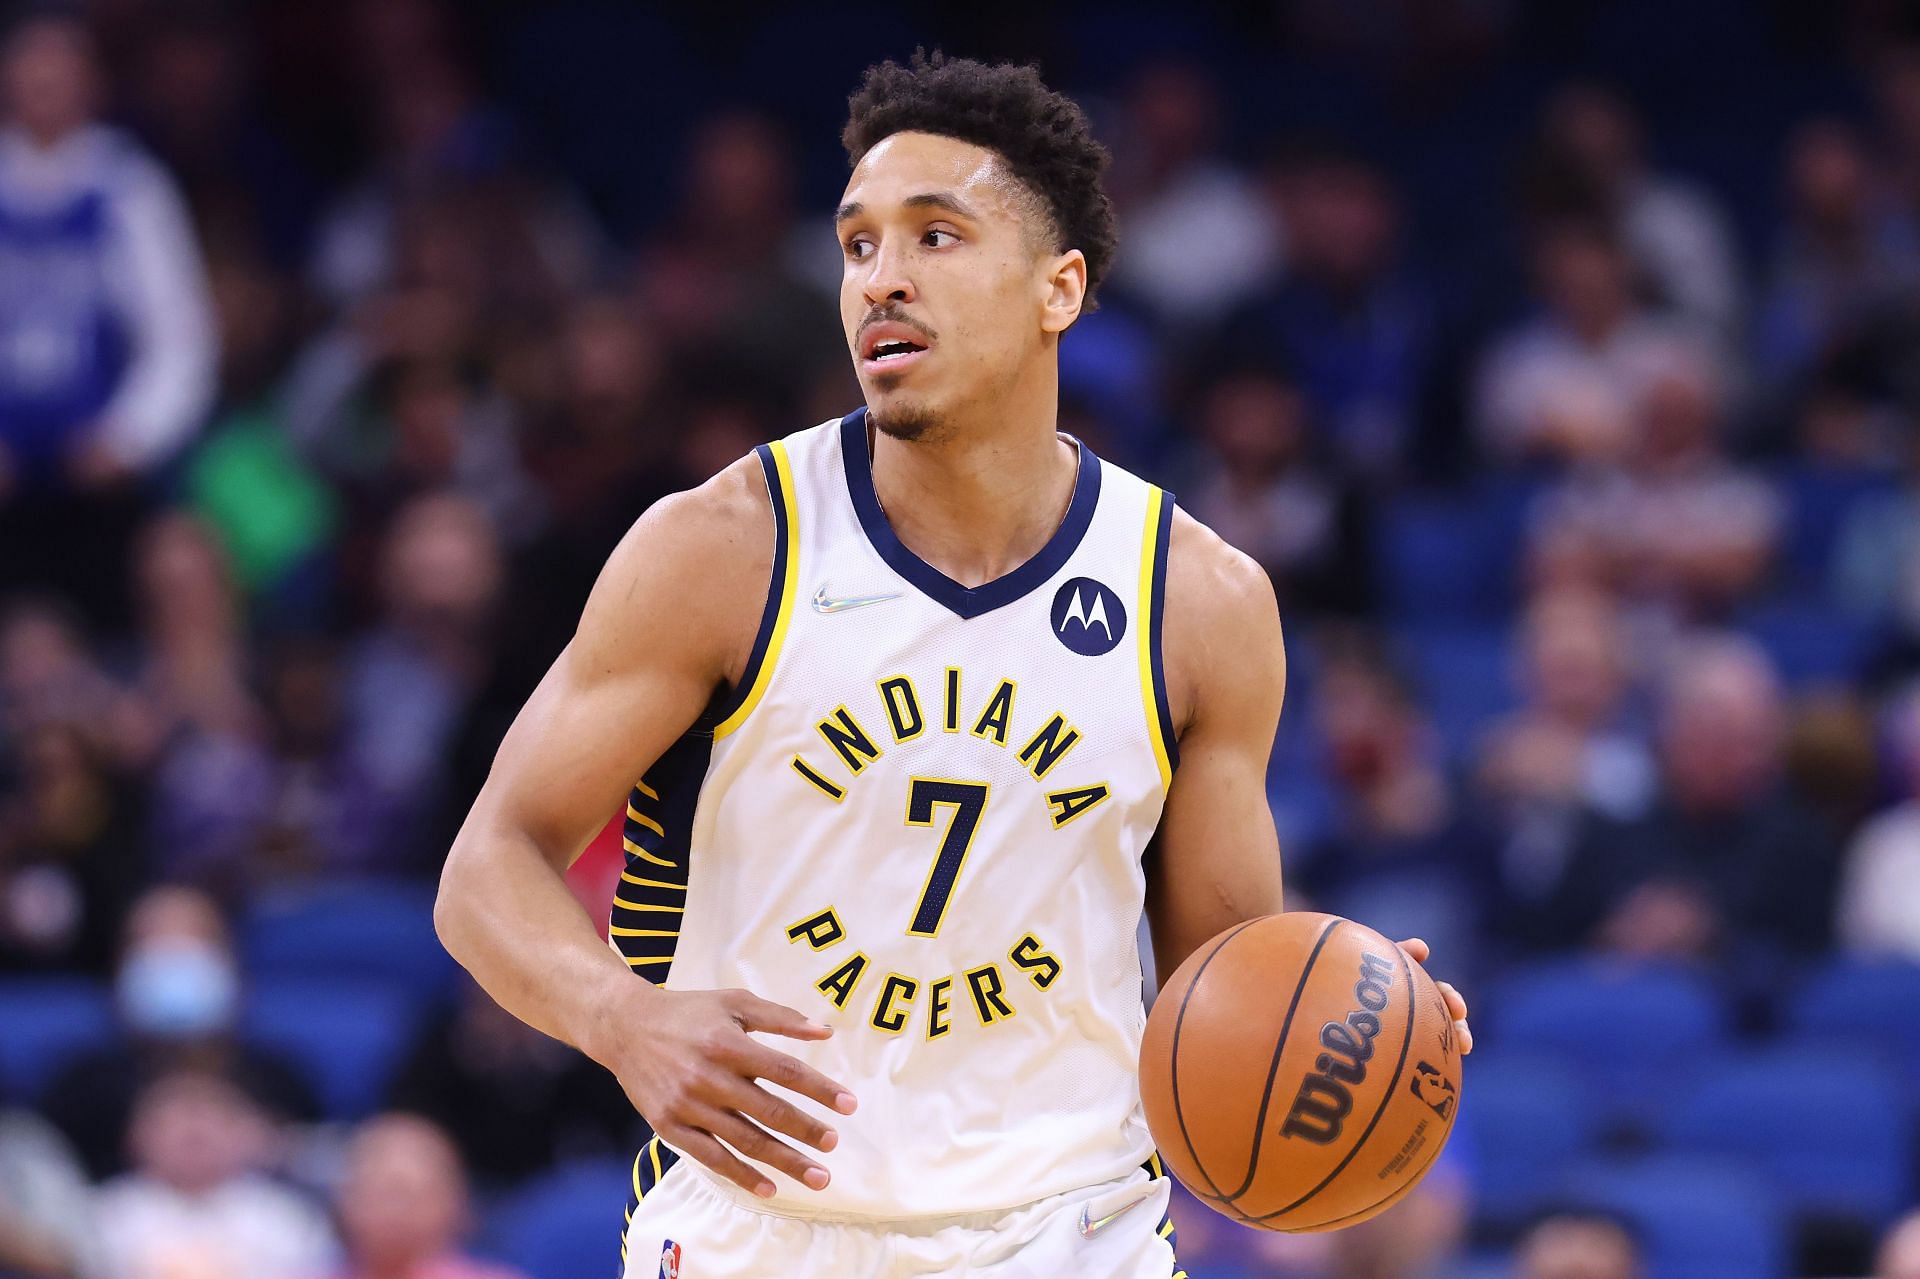 Brogdon in action for the Indiana Pacers against the Orlando Magic